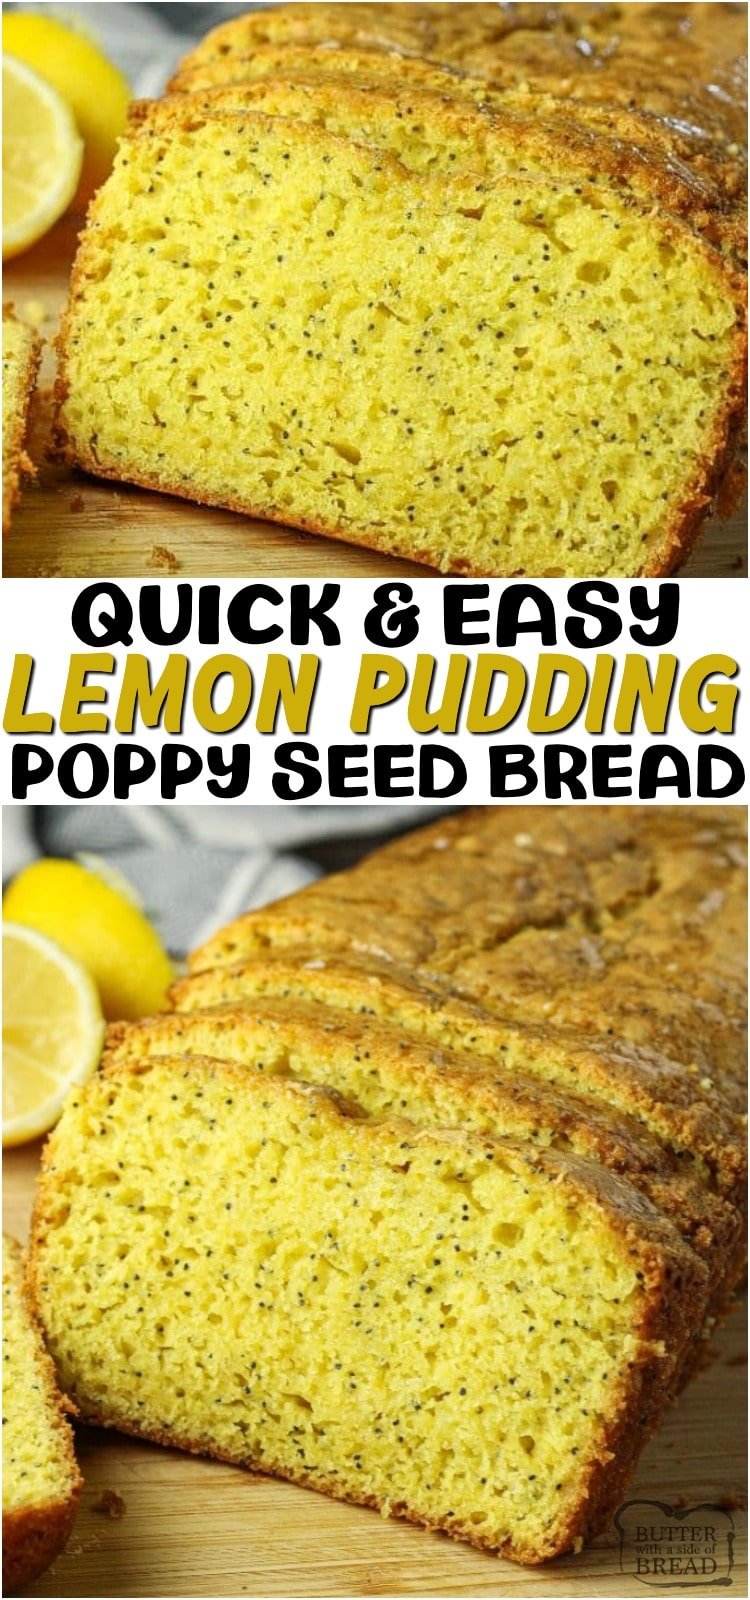 Easy Lemon Poppy Seed Bread is a simple, sweet bread recipe that is made with just a few ingredients. Cake mix & lemon pudding mix make this quick bread come together fast. This simple quick bread recipe will be one you will want to make over and over again. #bread #lemon #quickbread #poppyseed #baking #recipe from BUTTER WITH A SIDE OF BREAD